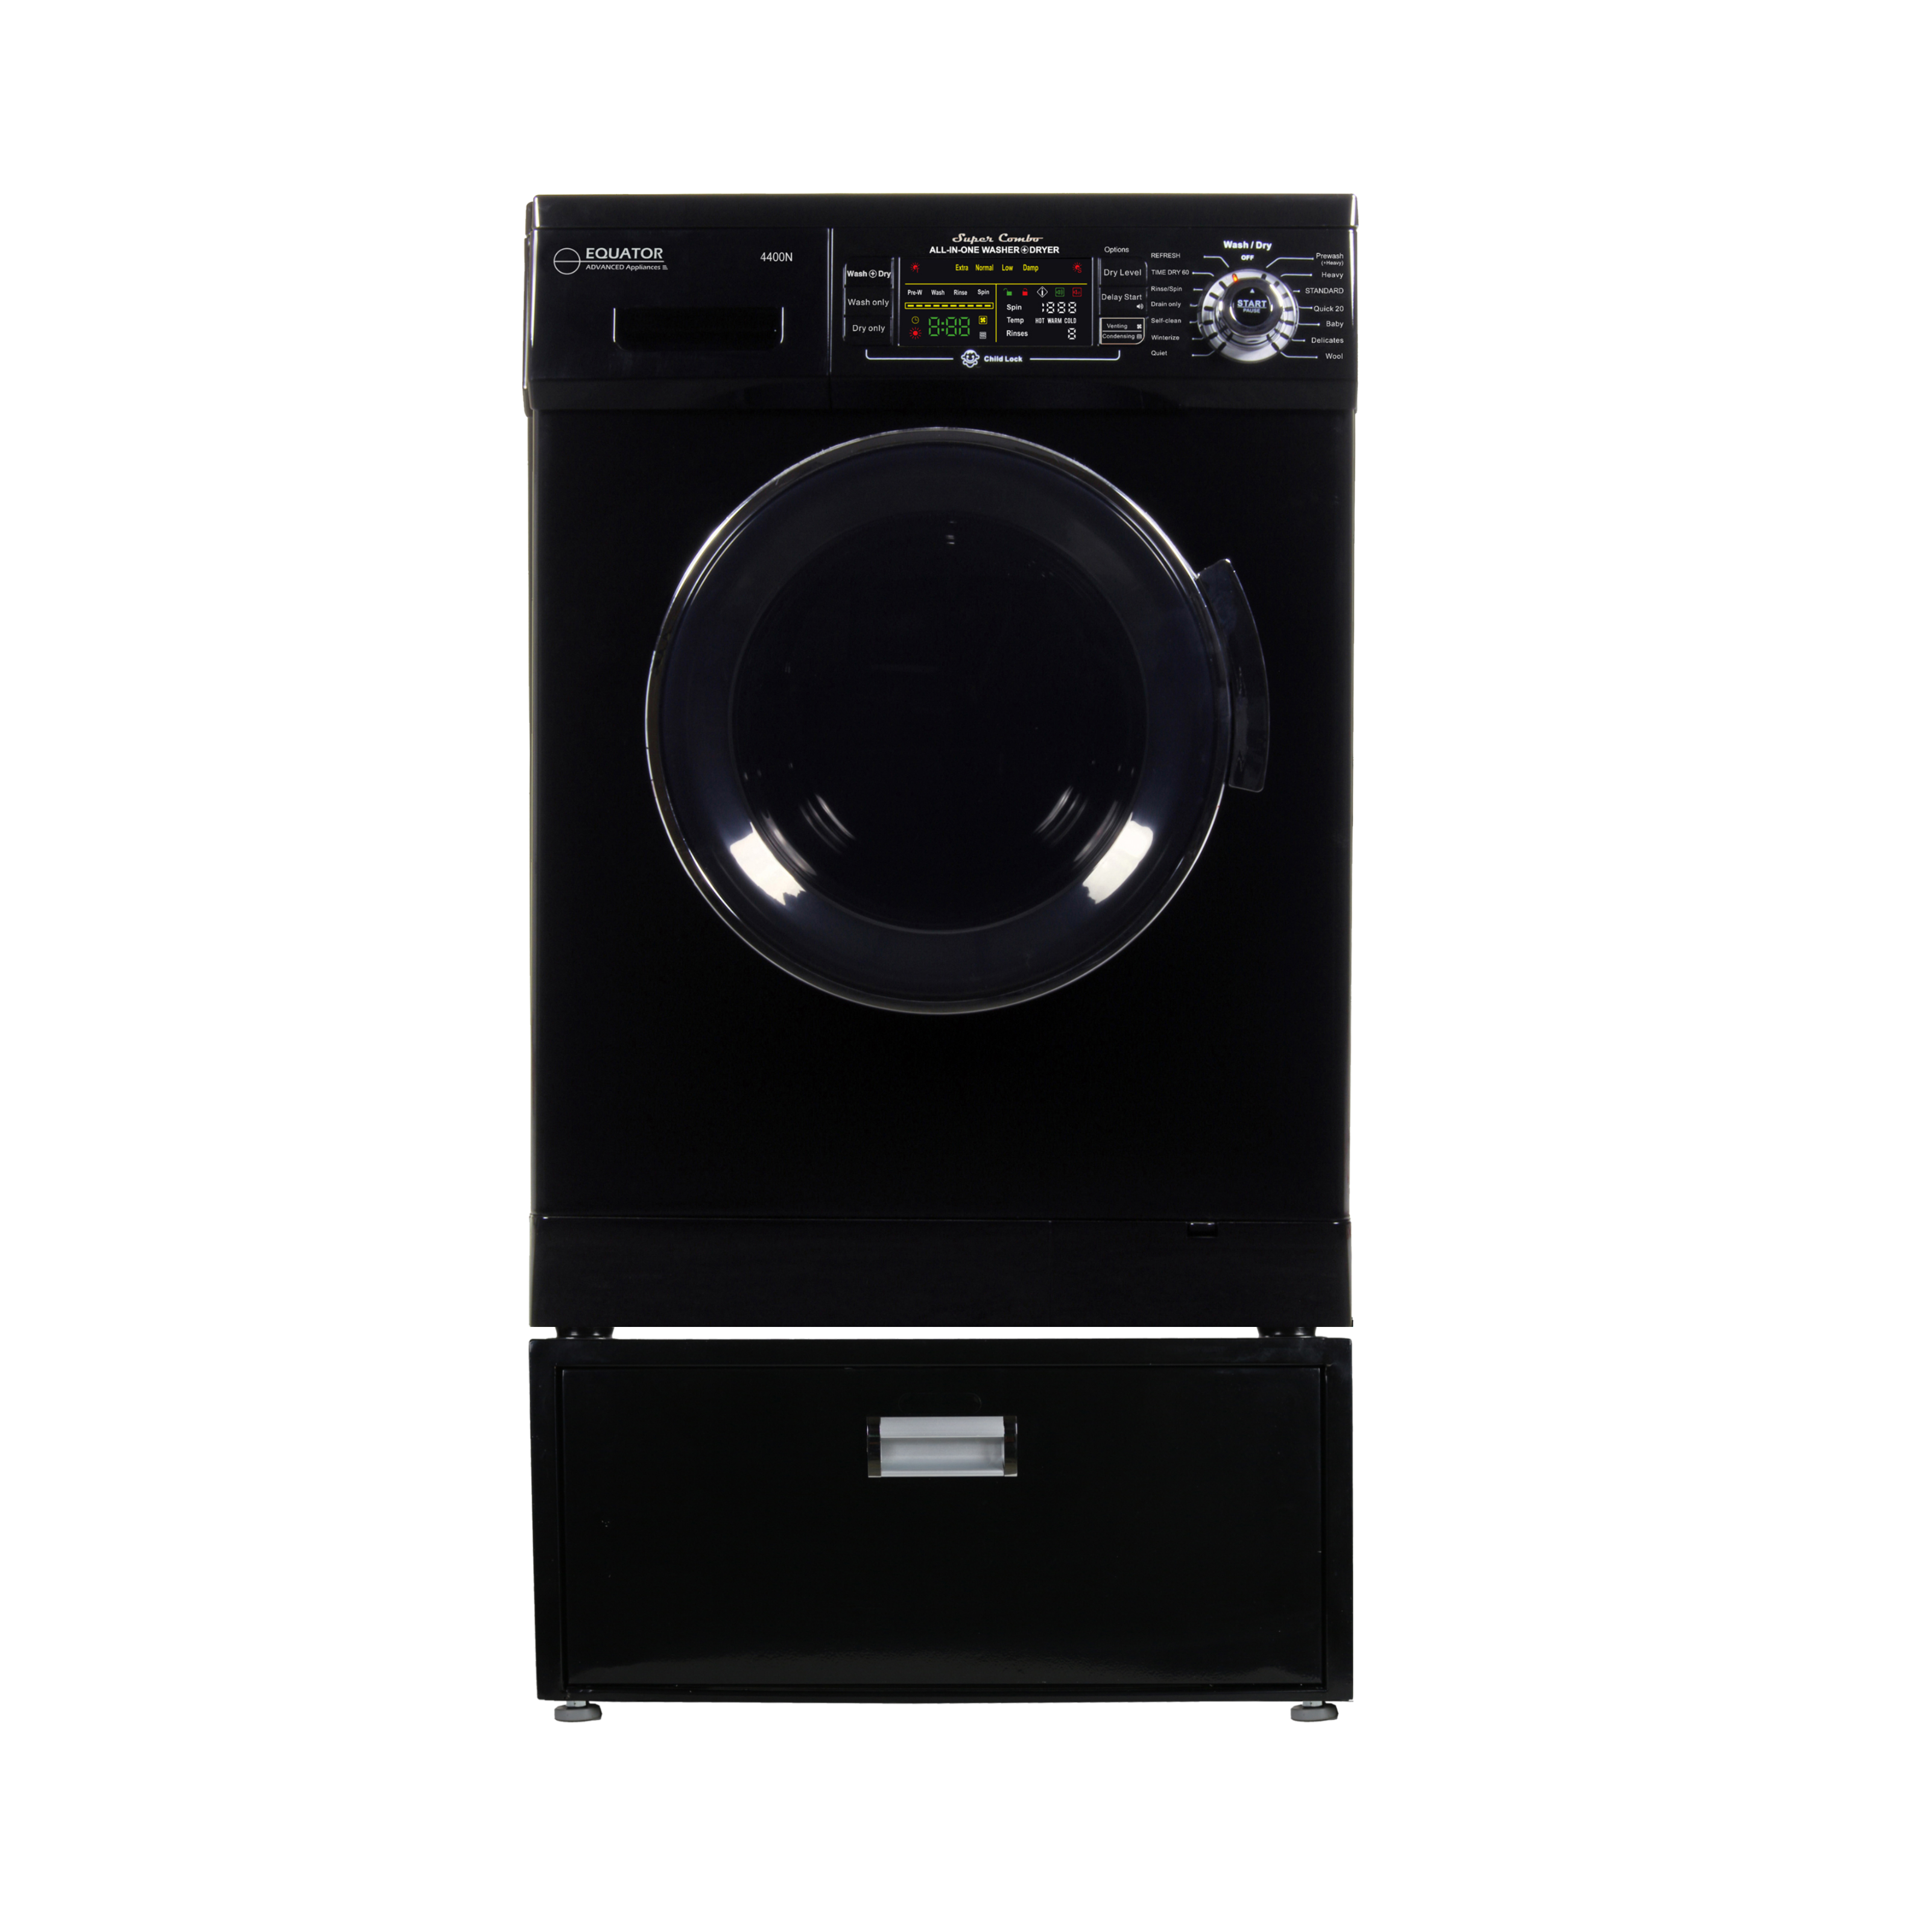 Equator Compact 13 lbs Combination Washer DryerVented/Ventless Dry + Laundry Pedestal with Drawer